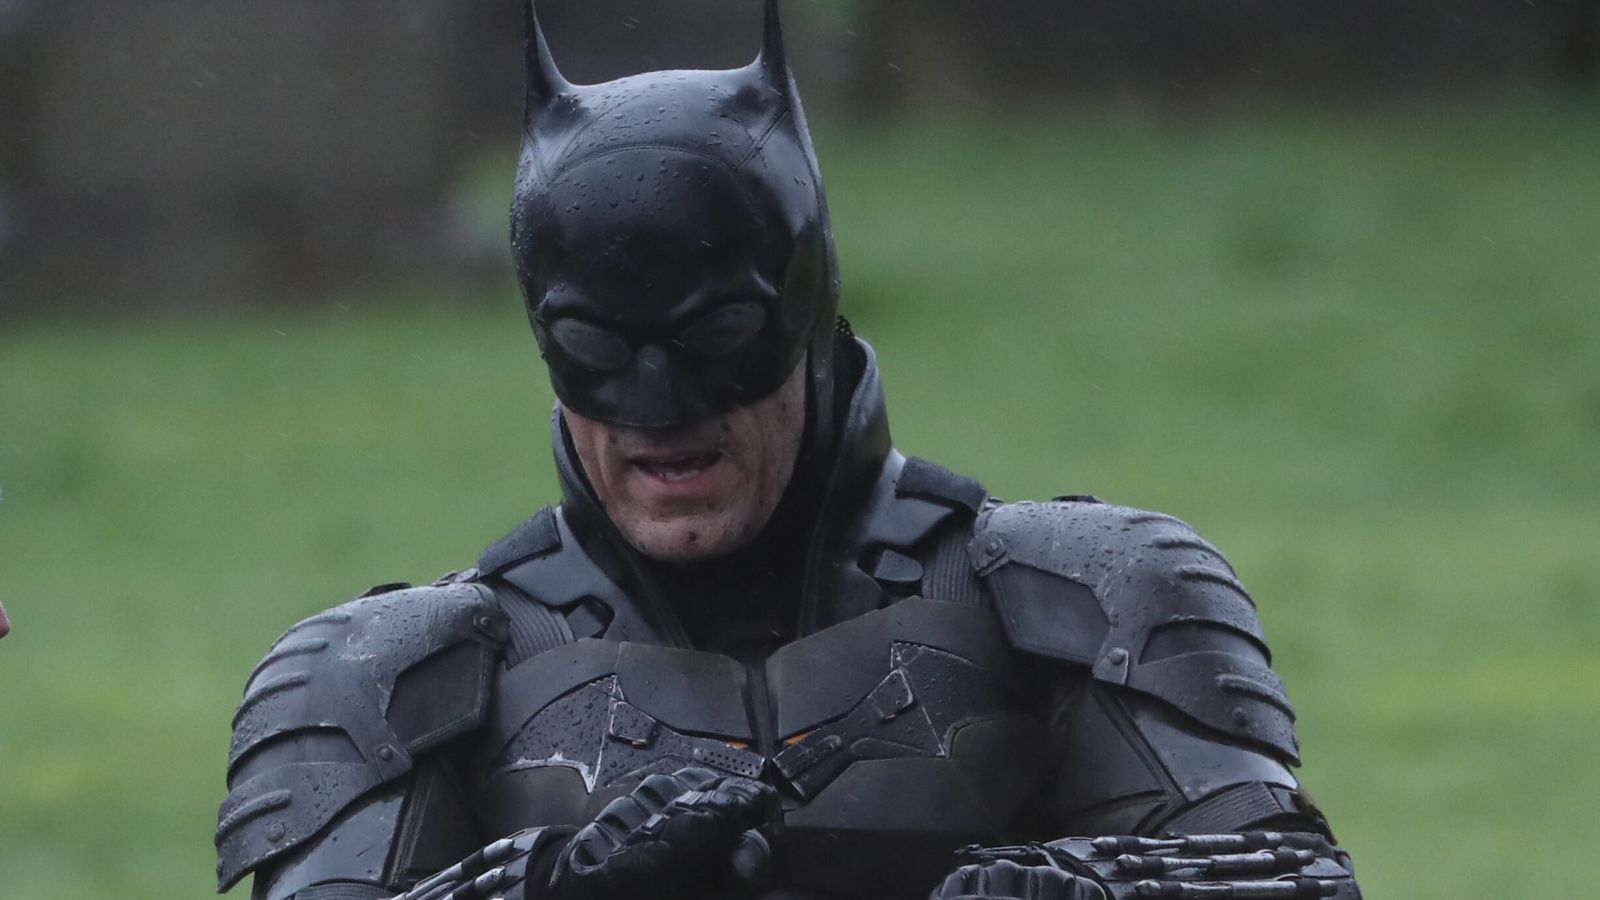 The Batman Robert Pattinson Suit And Batcycle Seen In New Photo